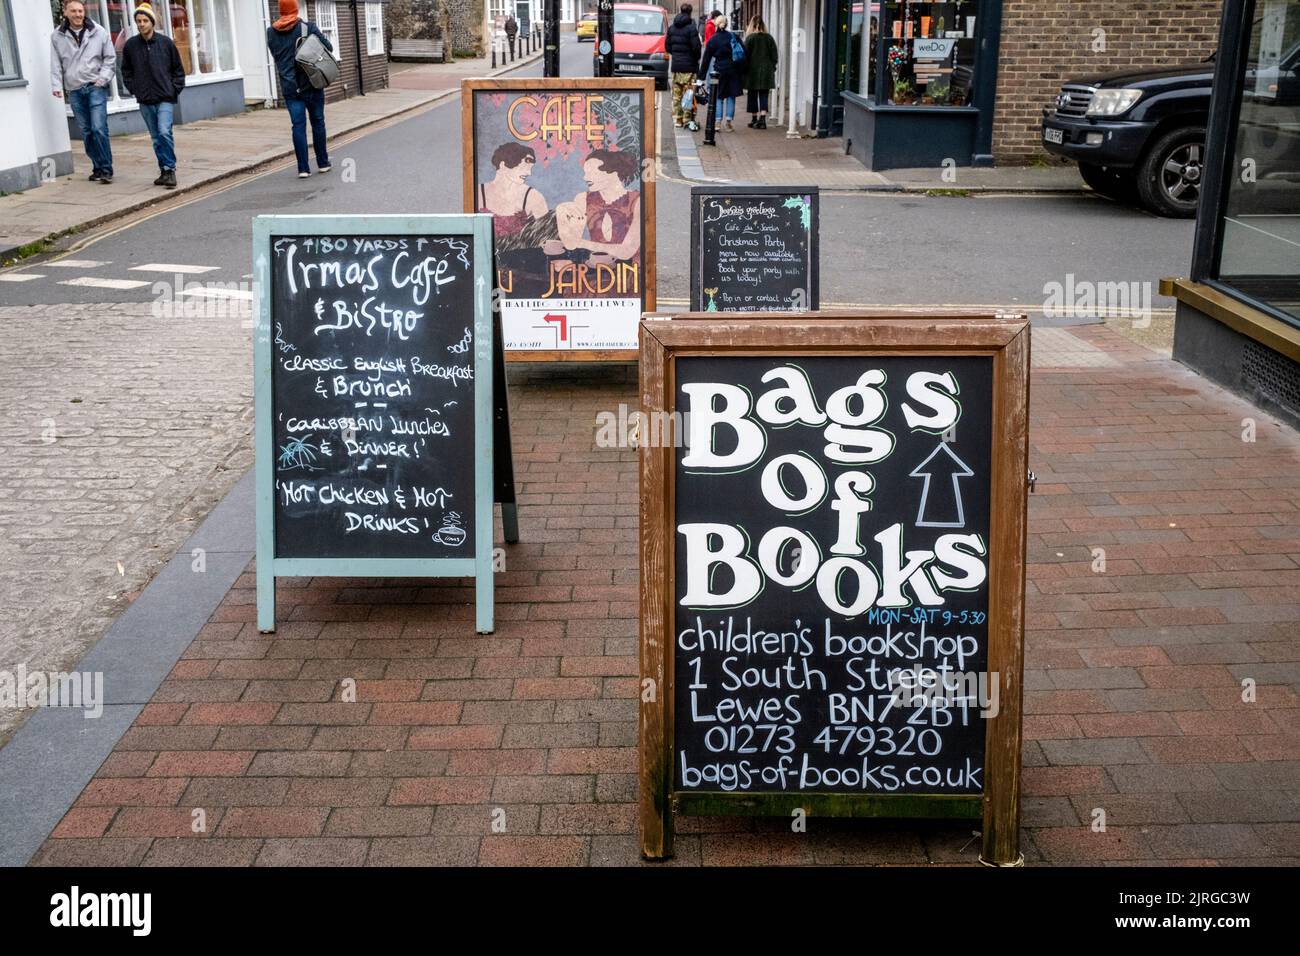 Shop Signs In The High Street, Lewes, East Sussex, UK. Stock Photo